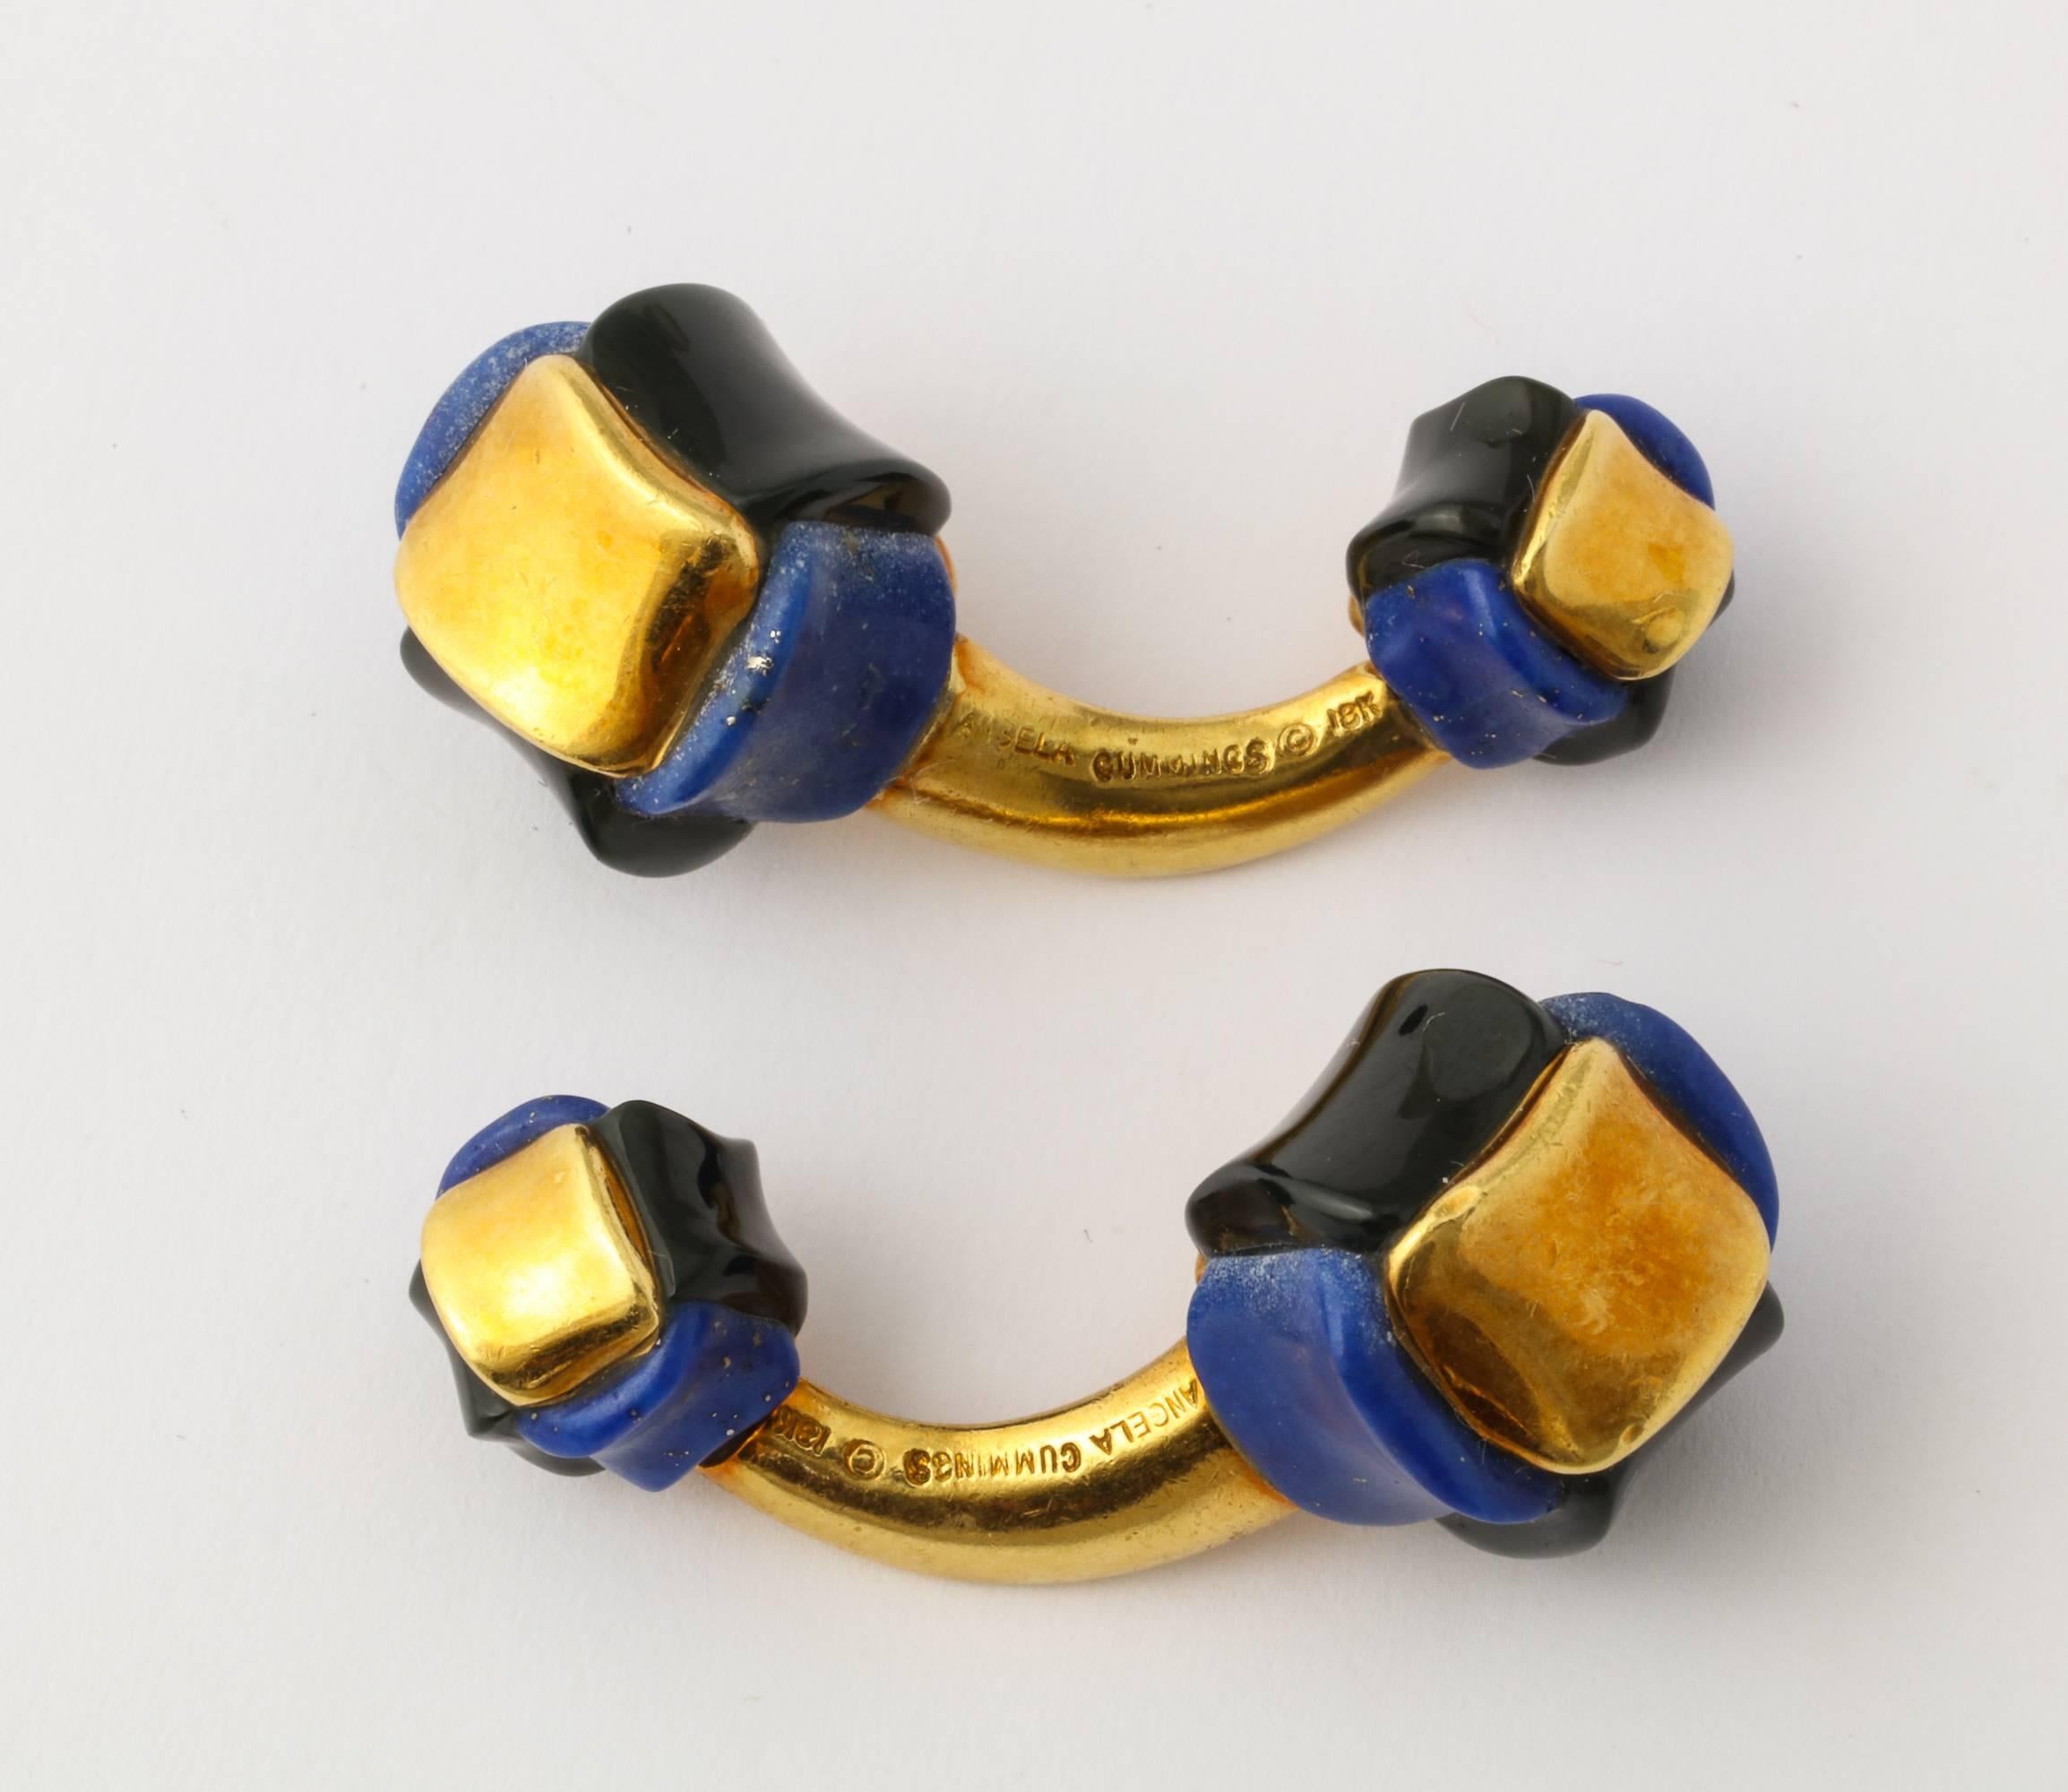 Angela Cummings Carved Lapis Lazuli, Black Jade, Gold Cufflinks In Excellent Condition For Sale In New York, NY